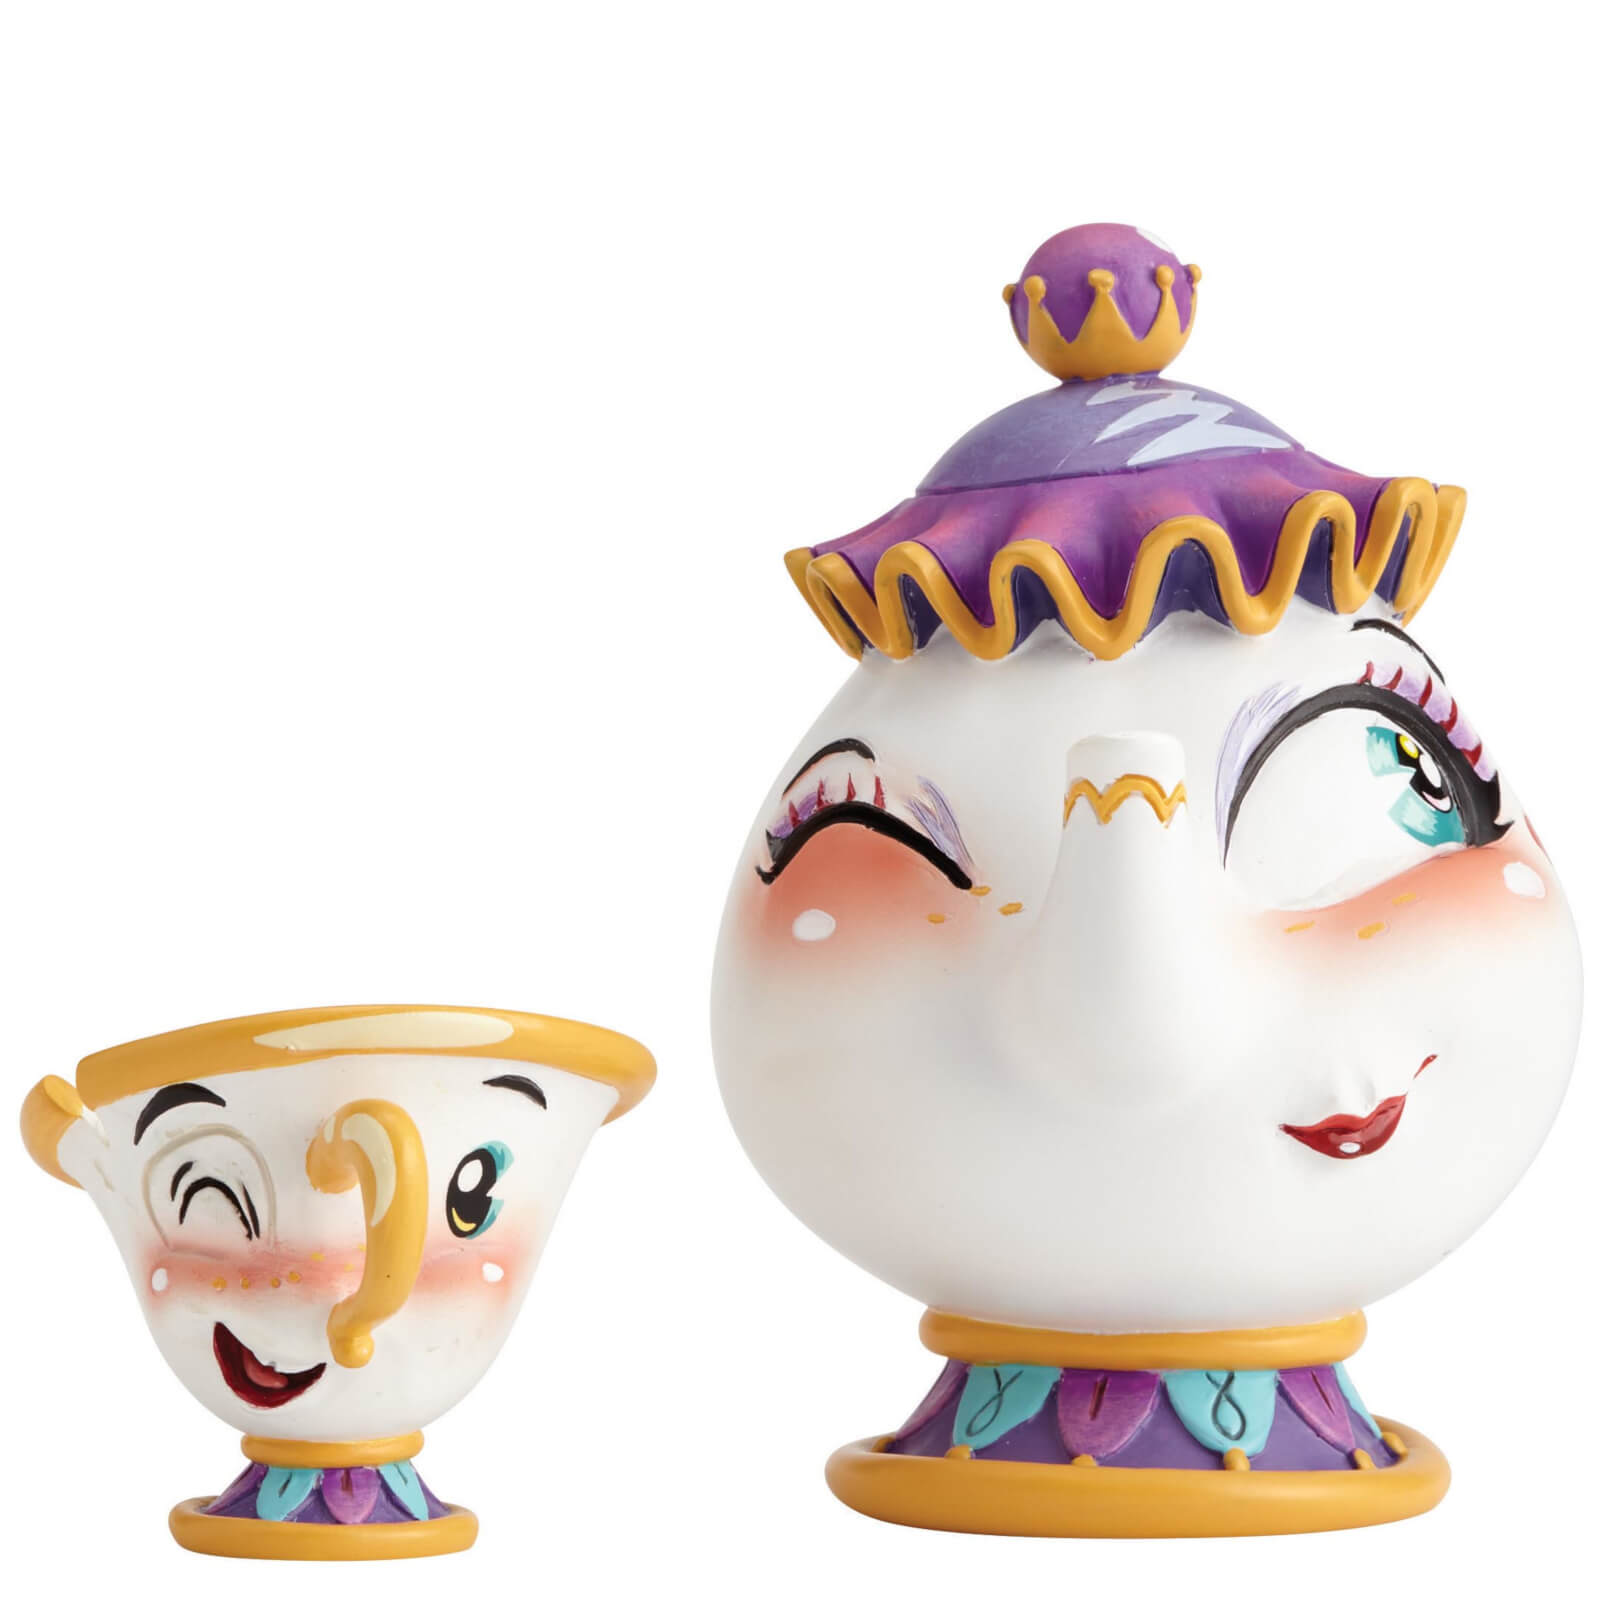 Image of Miss Mindy Mrs. Potts and Chip Figurine